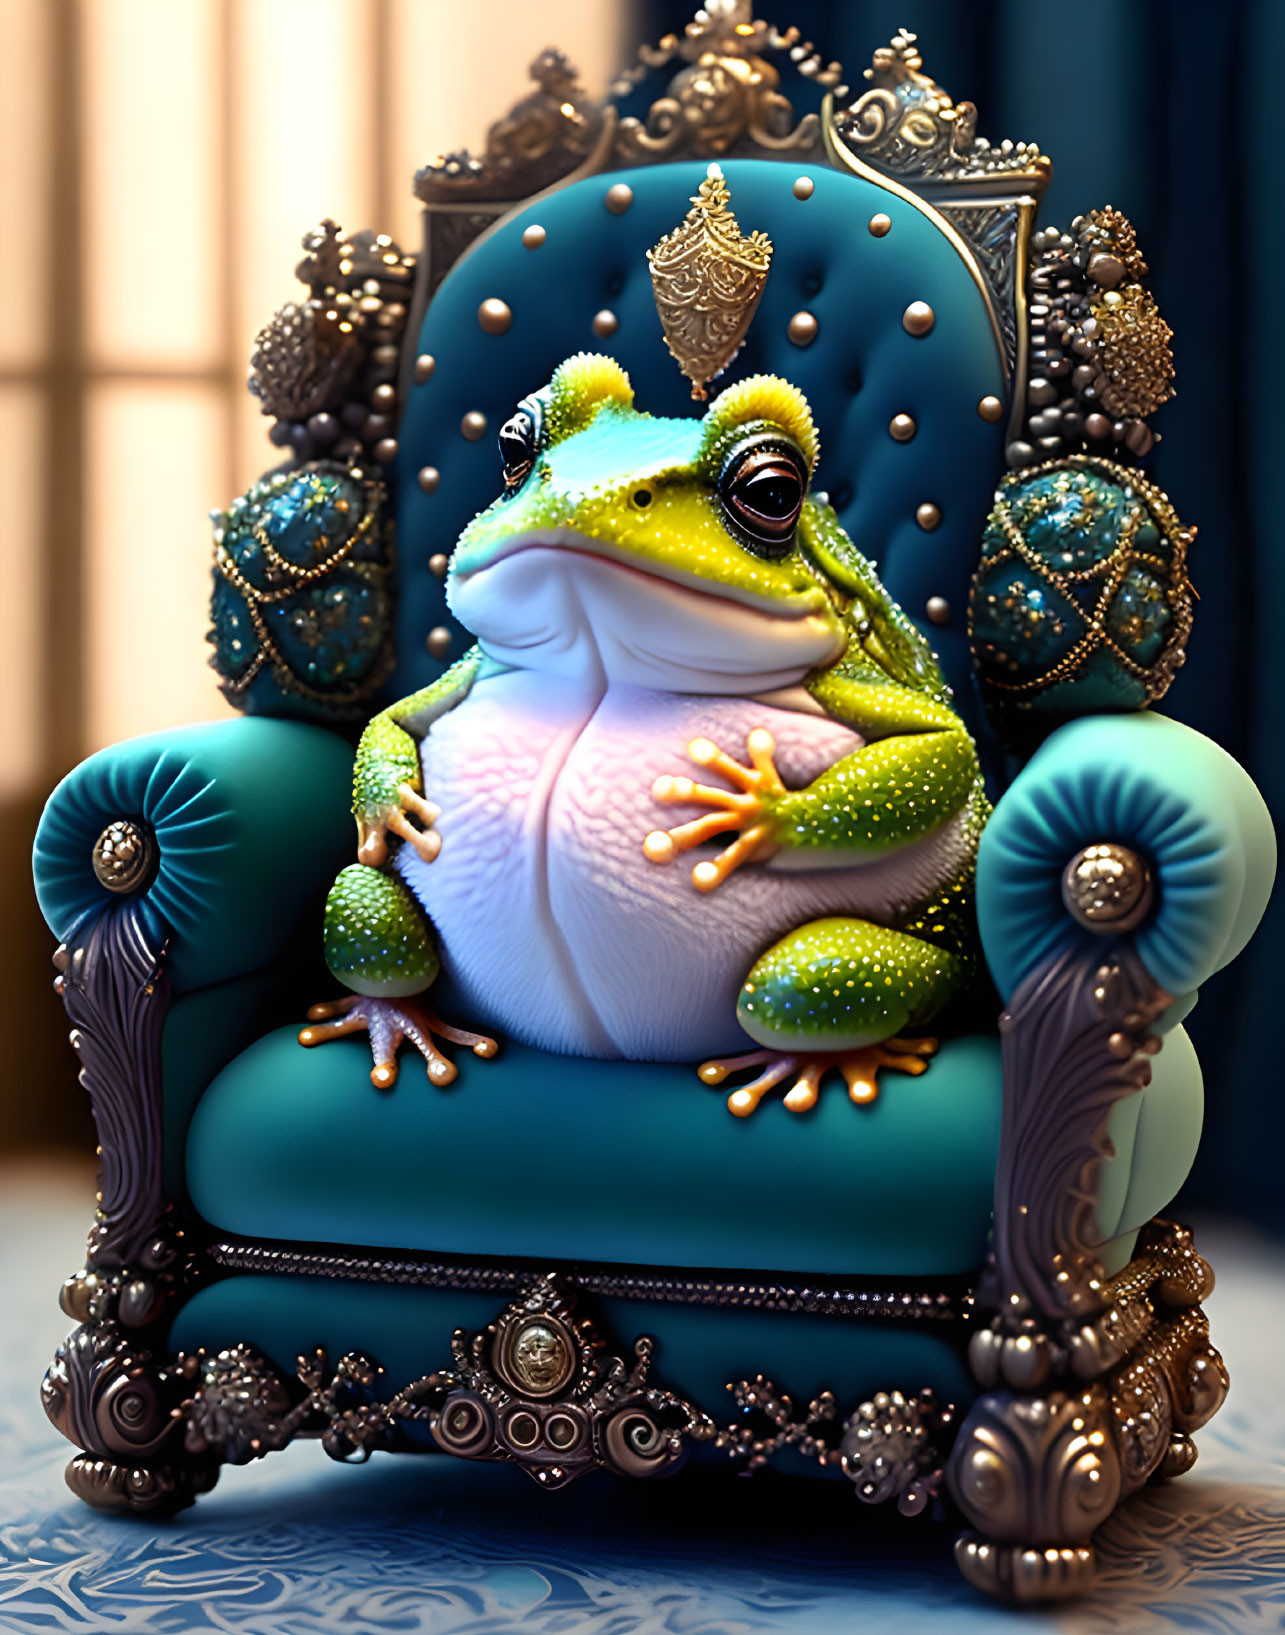 Regal frog with crown on ornate jewel-adorned throne